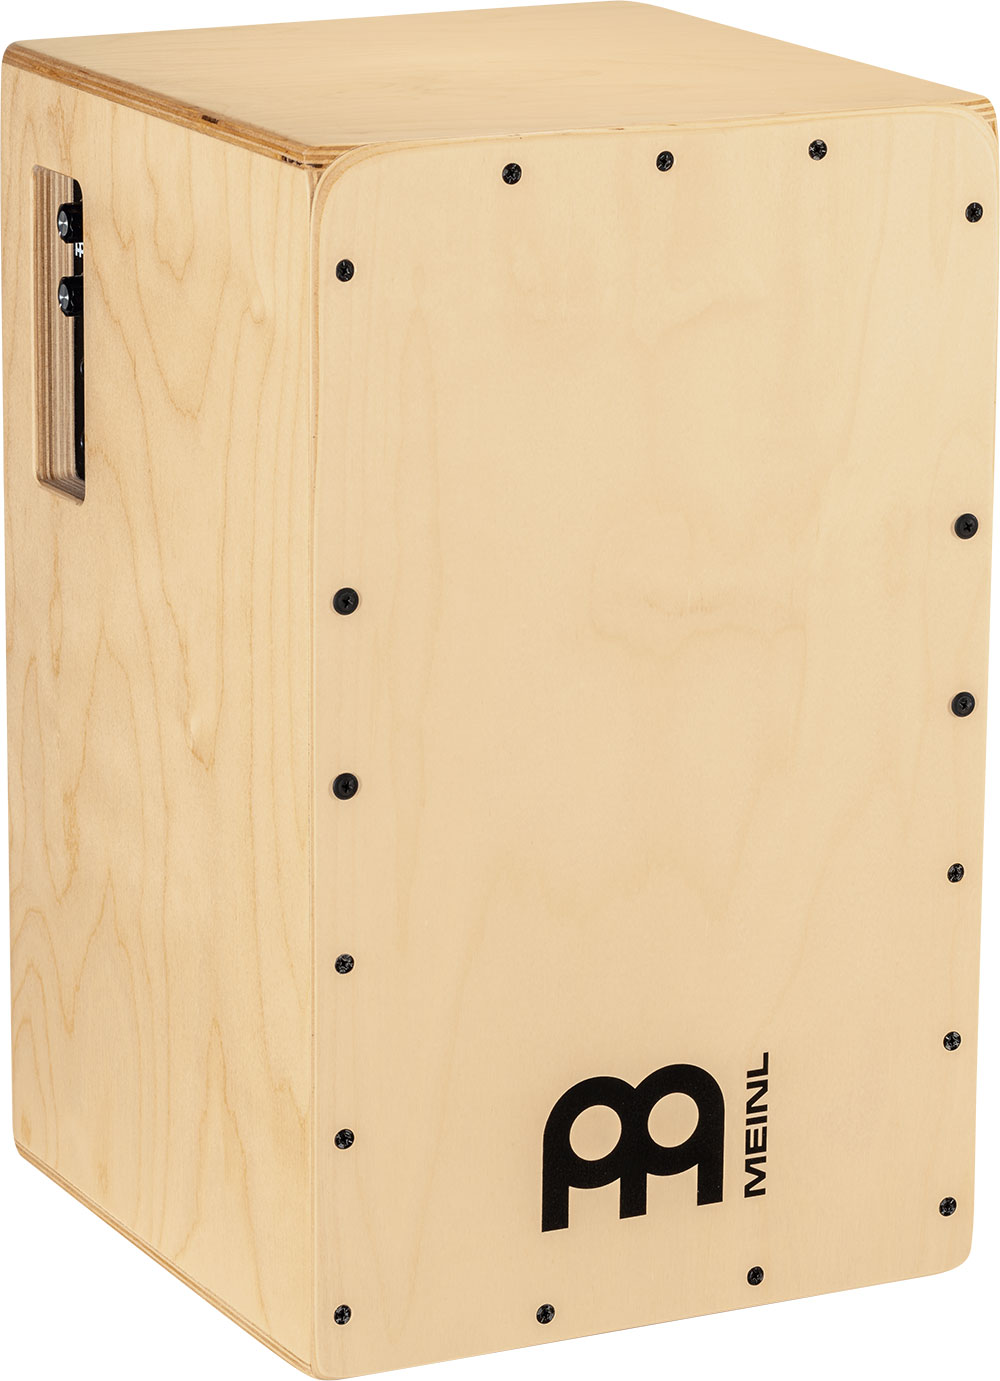 MEINL PERCUSSION PICKUP SNARECRAFT SERIES CAJON, NATURAL - PSC100NT